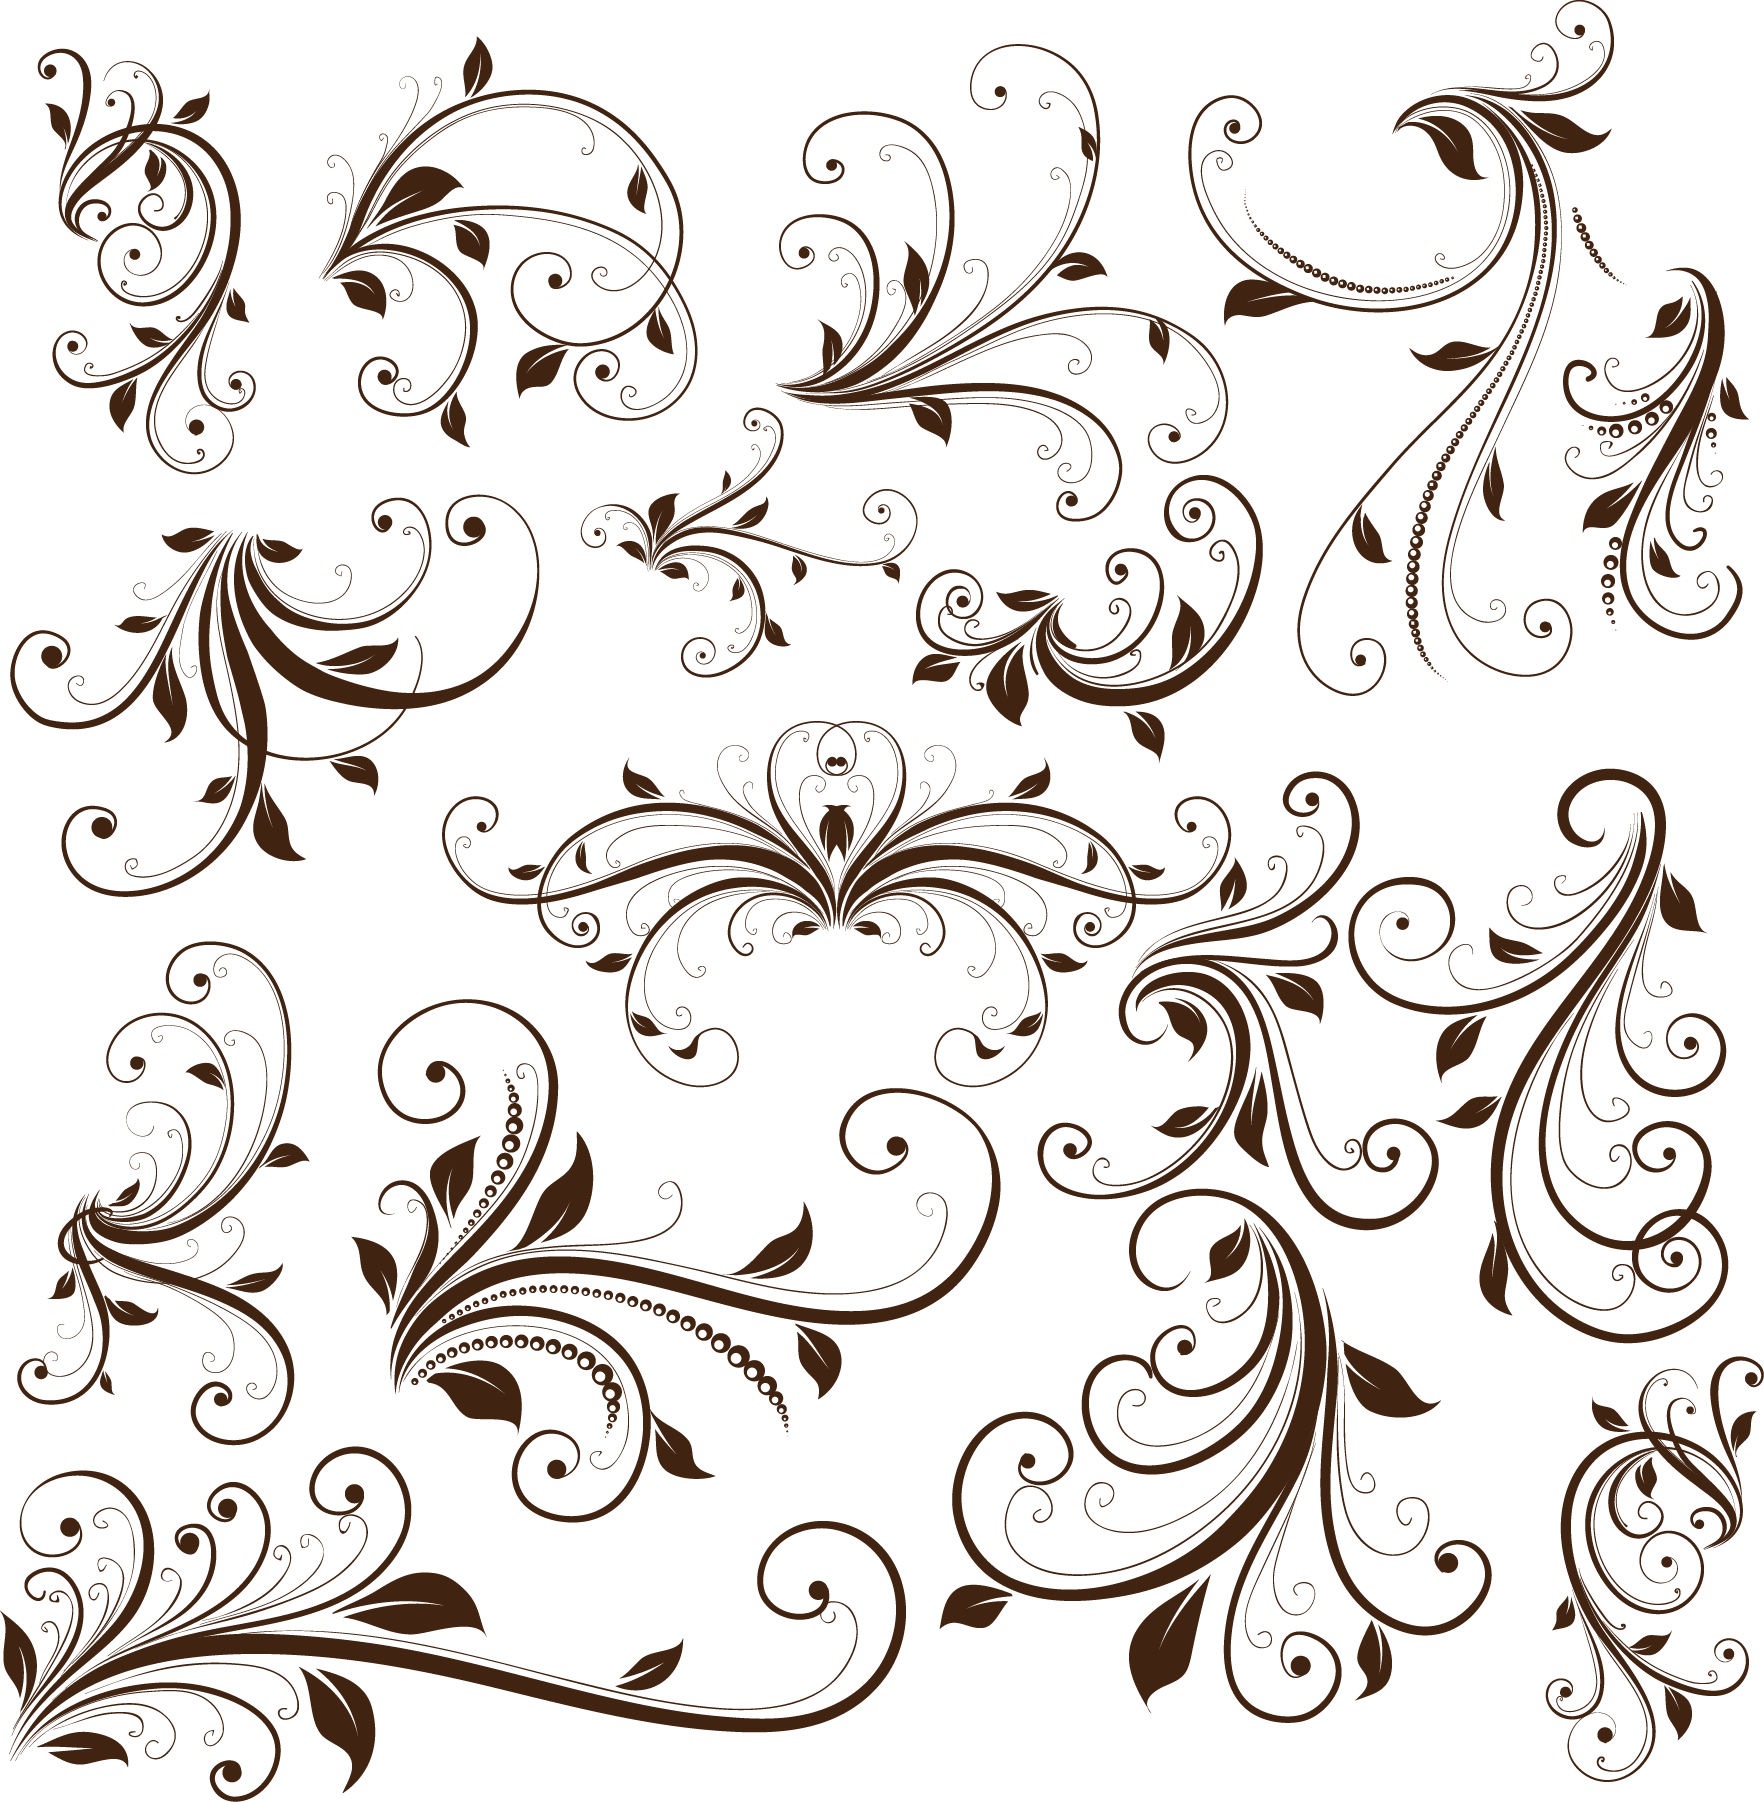 Anh Dại Khờ: Swirl Floral Decorative Element Vector Graphic